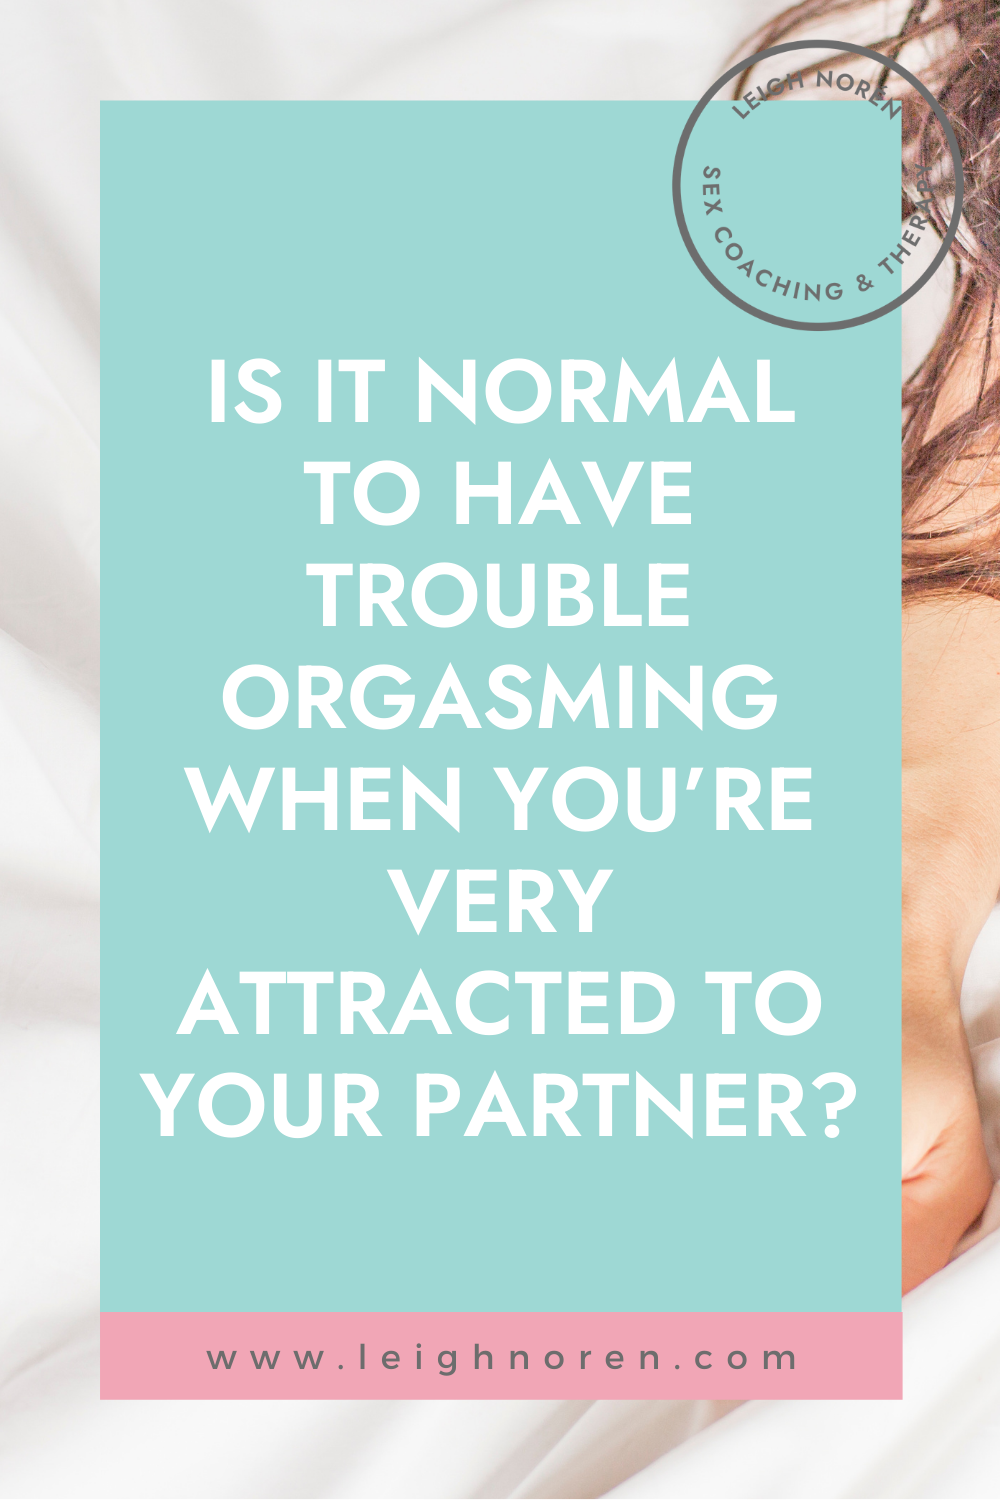 Is It Normal To Have Trouble Orgasming When You're Very Attracted To Your Partner?